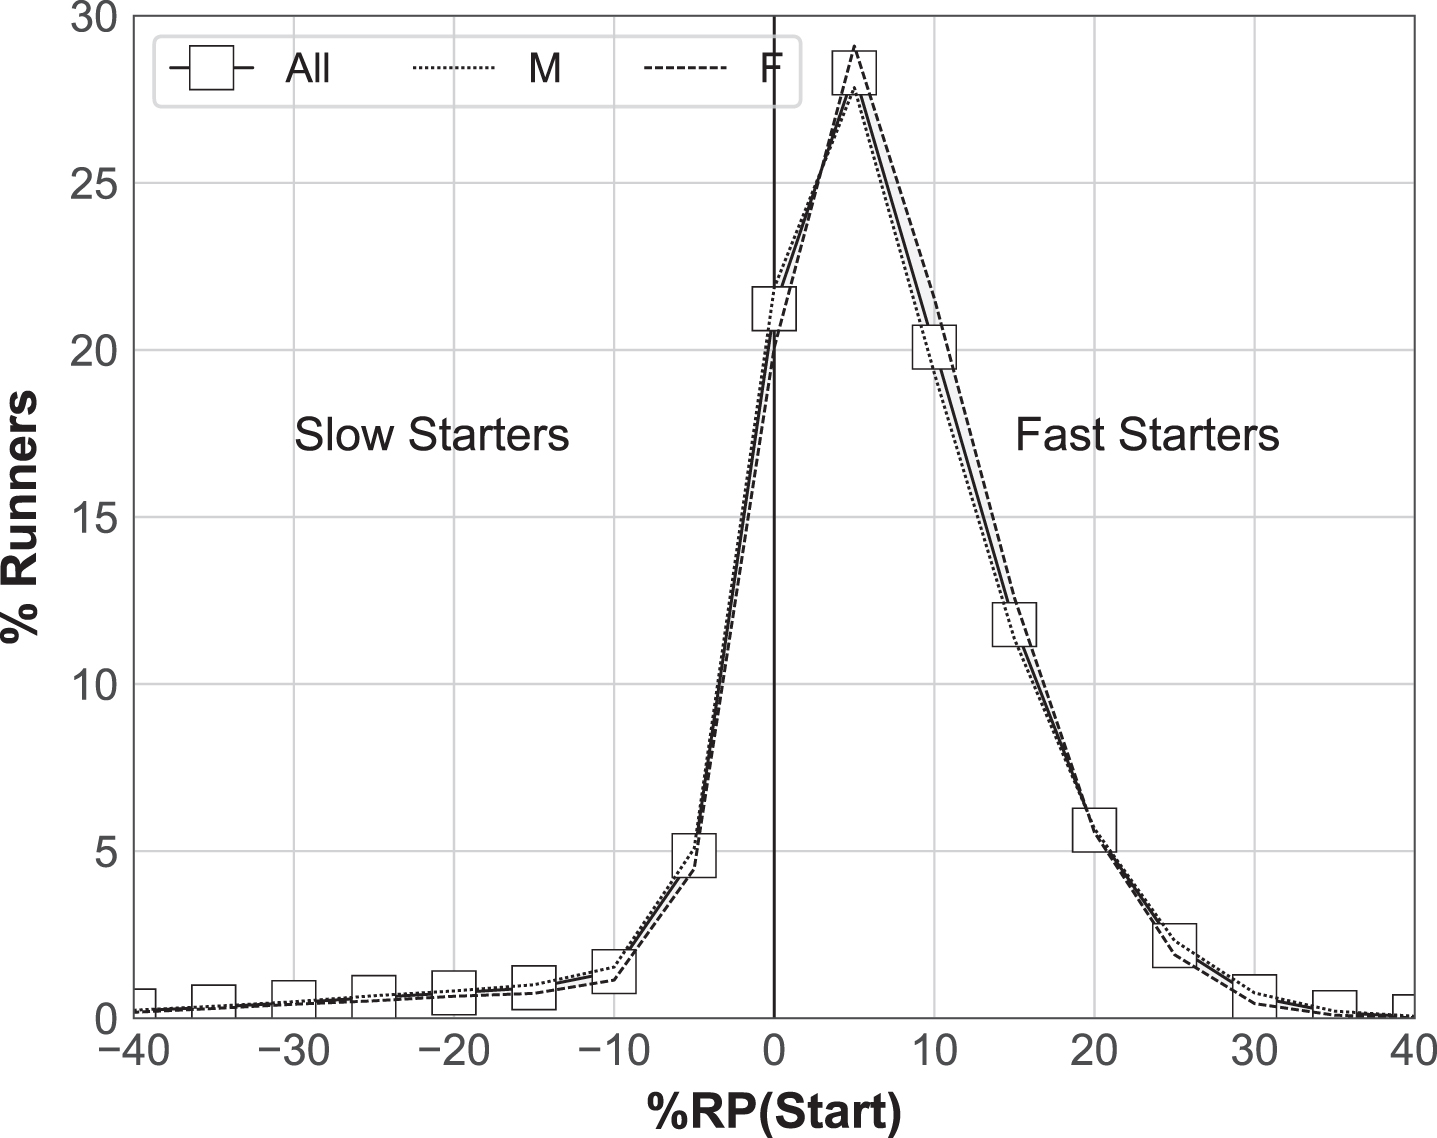 The mean percentage of runners (all, male, female) with given relative start paces.